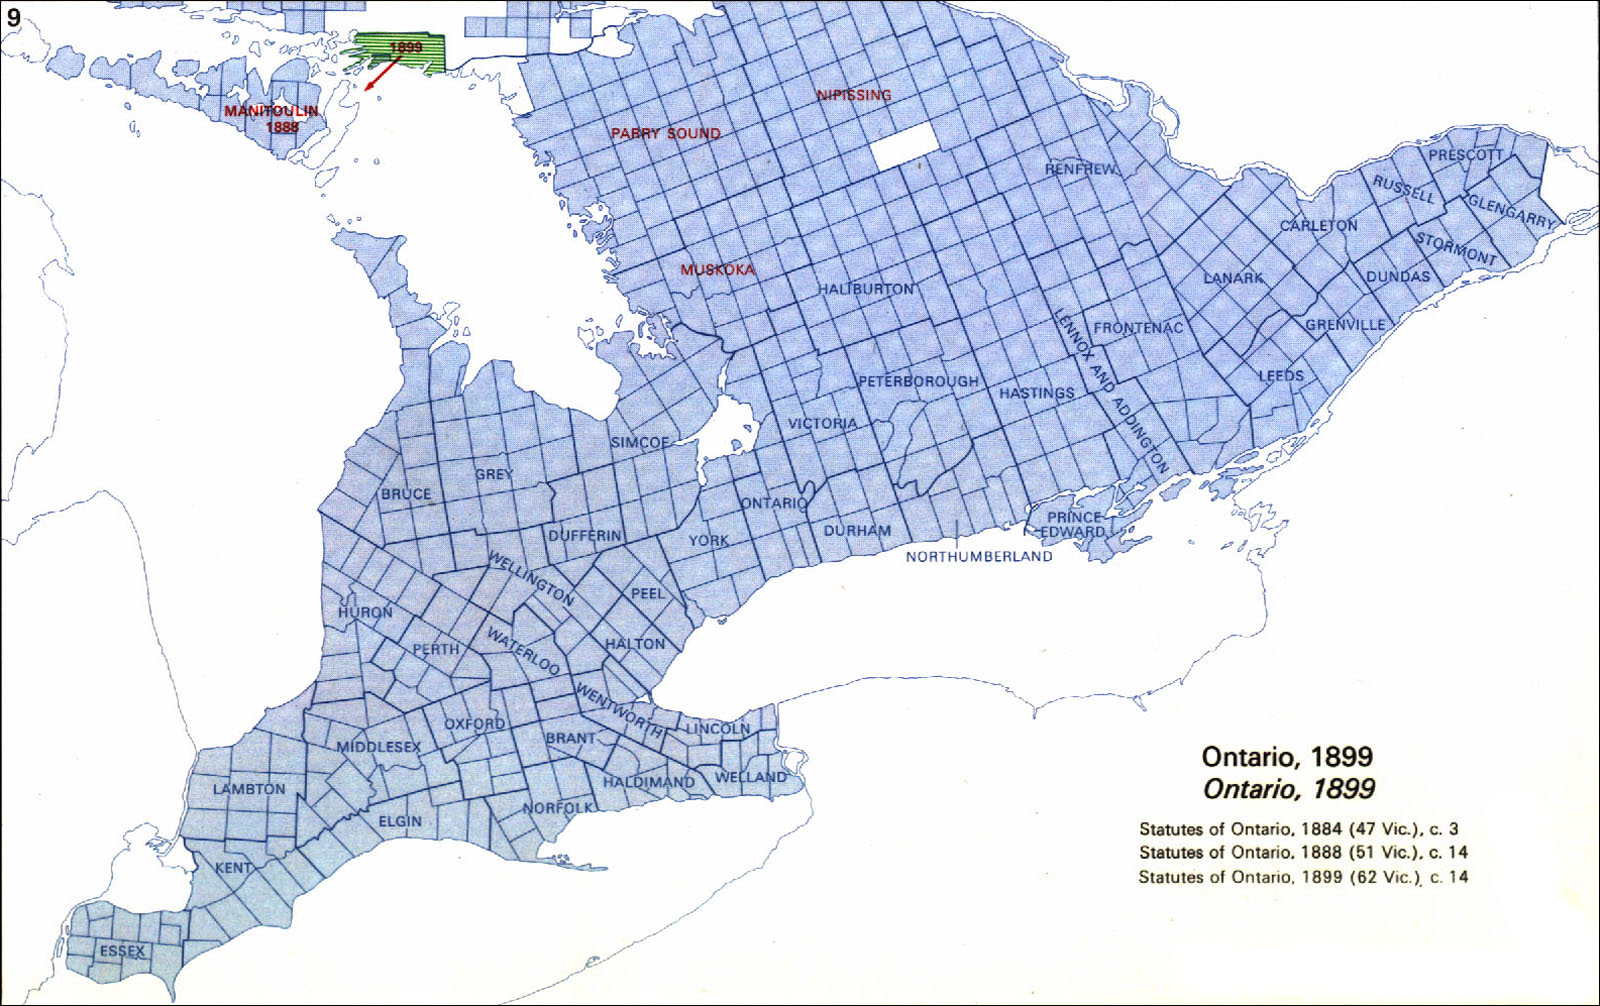 Large scale map of Ontario's districts - 1899